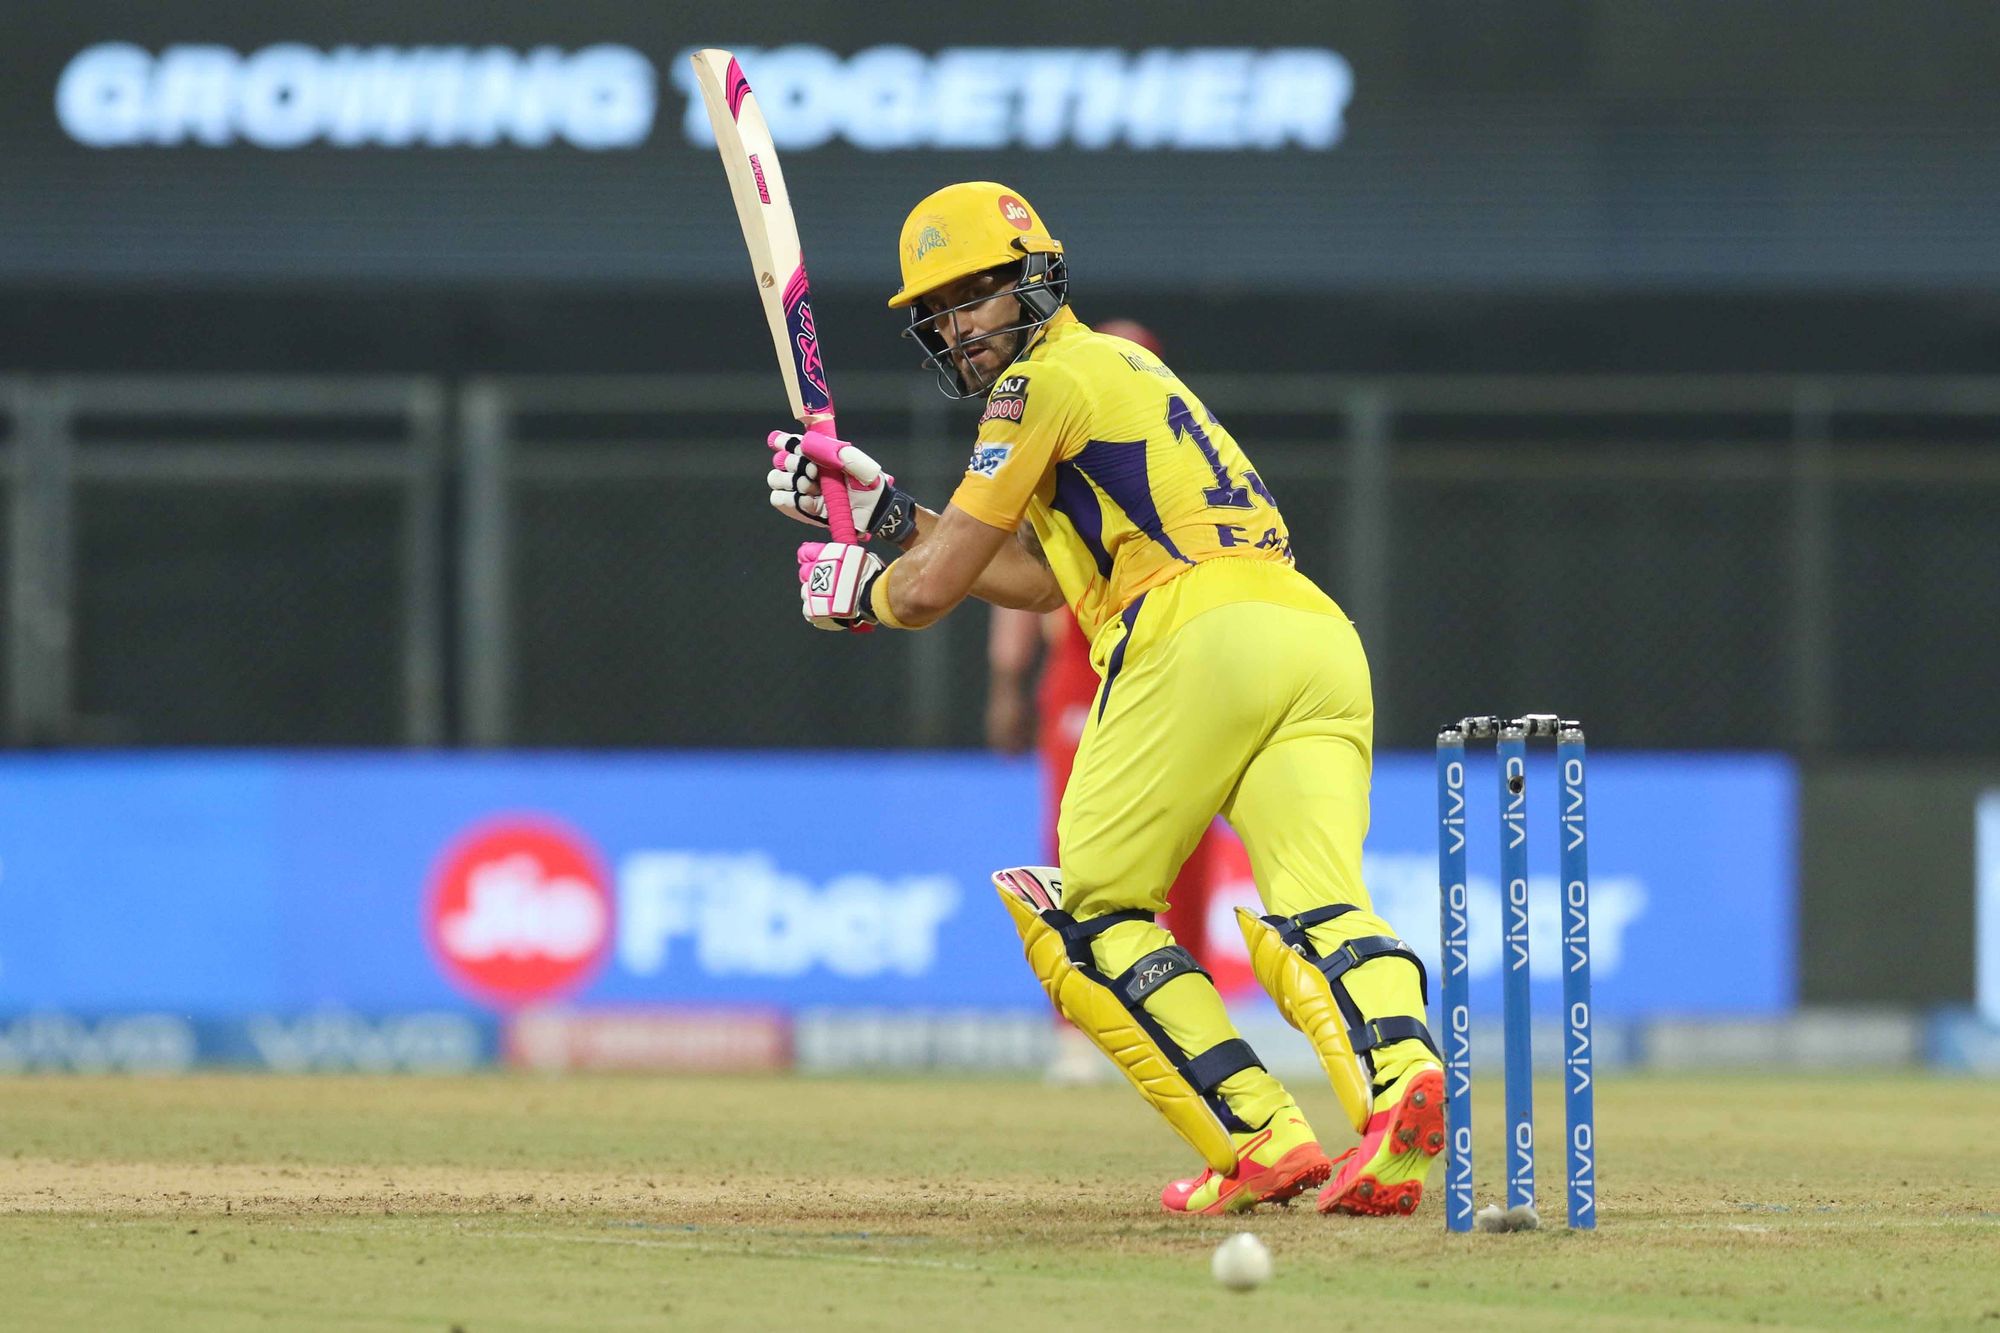 Three richly bets that could land you a kingdom from Chennai’s clash against Hyderabad